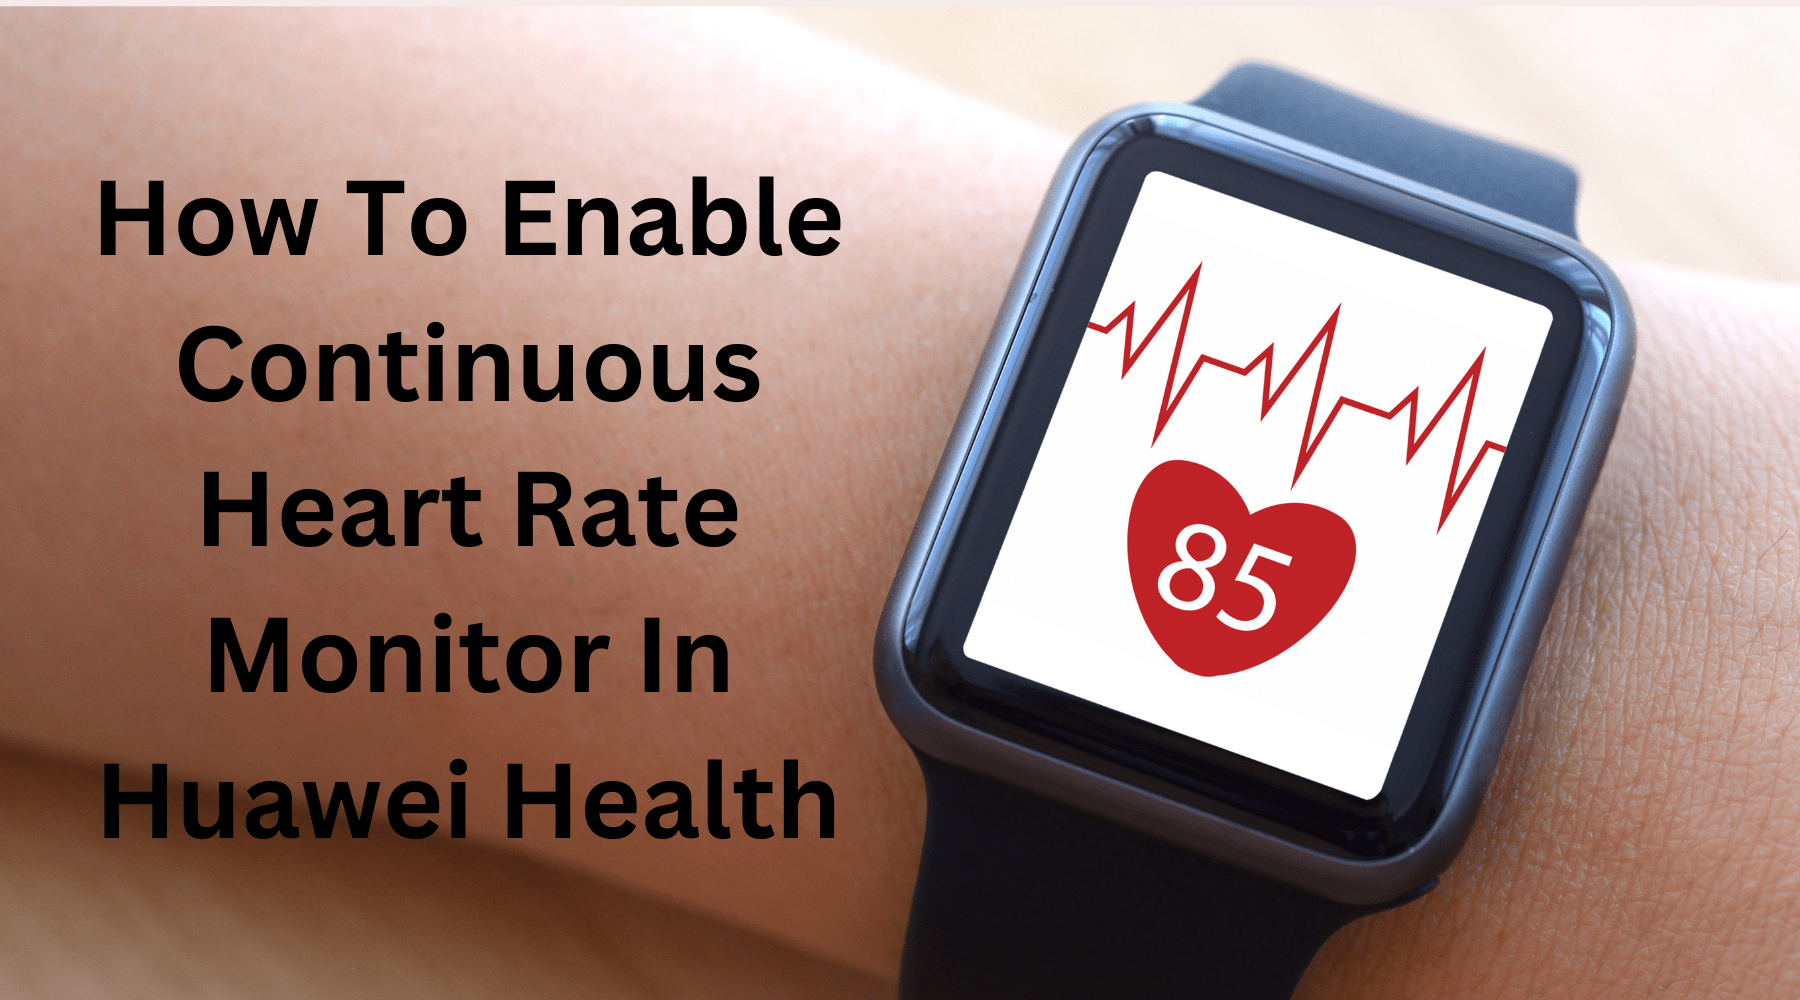 How To Enable Continuous Heart Rate Monitor In Huawei Health